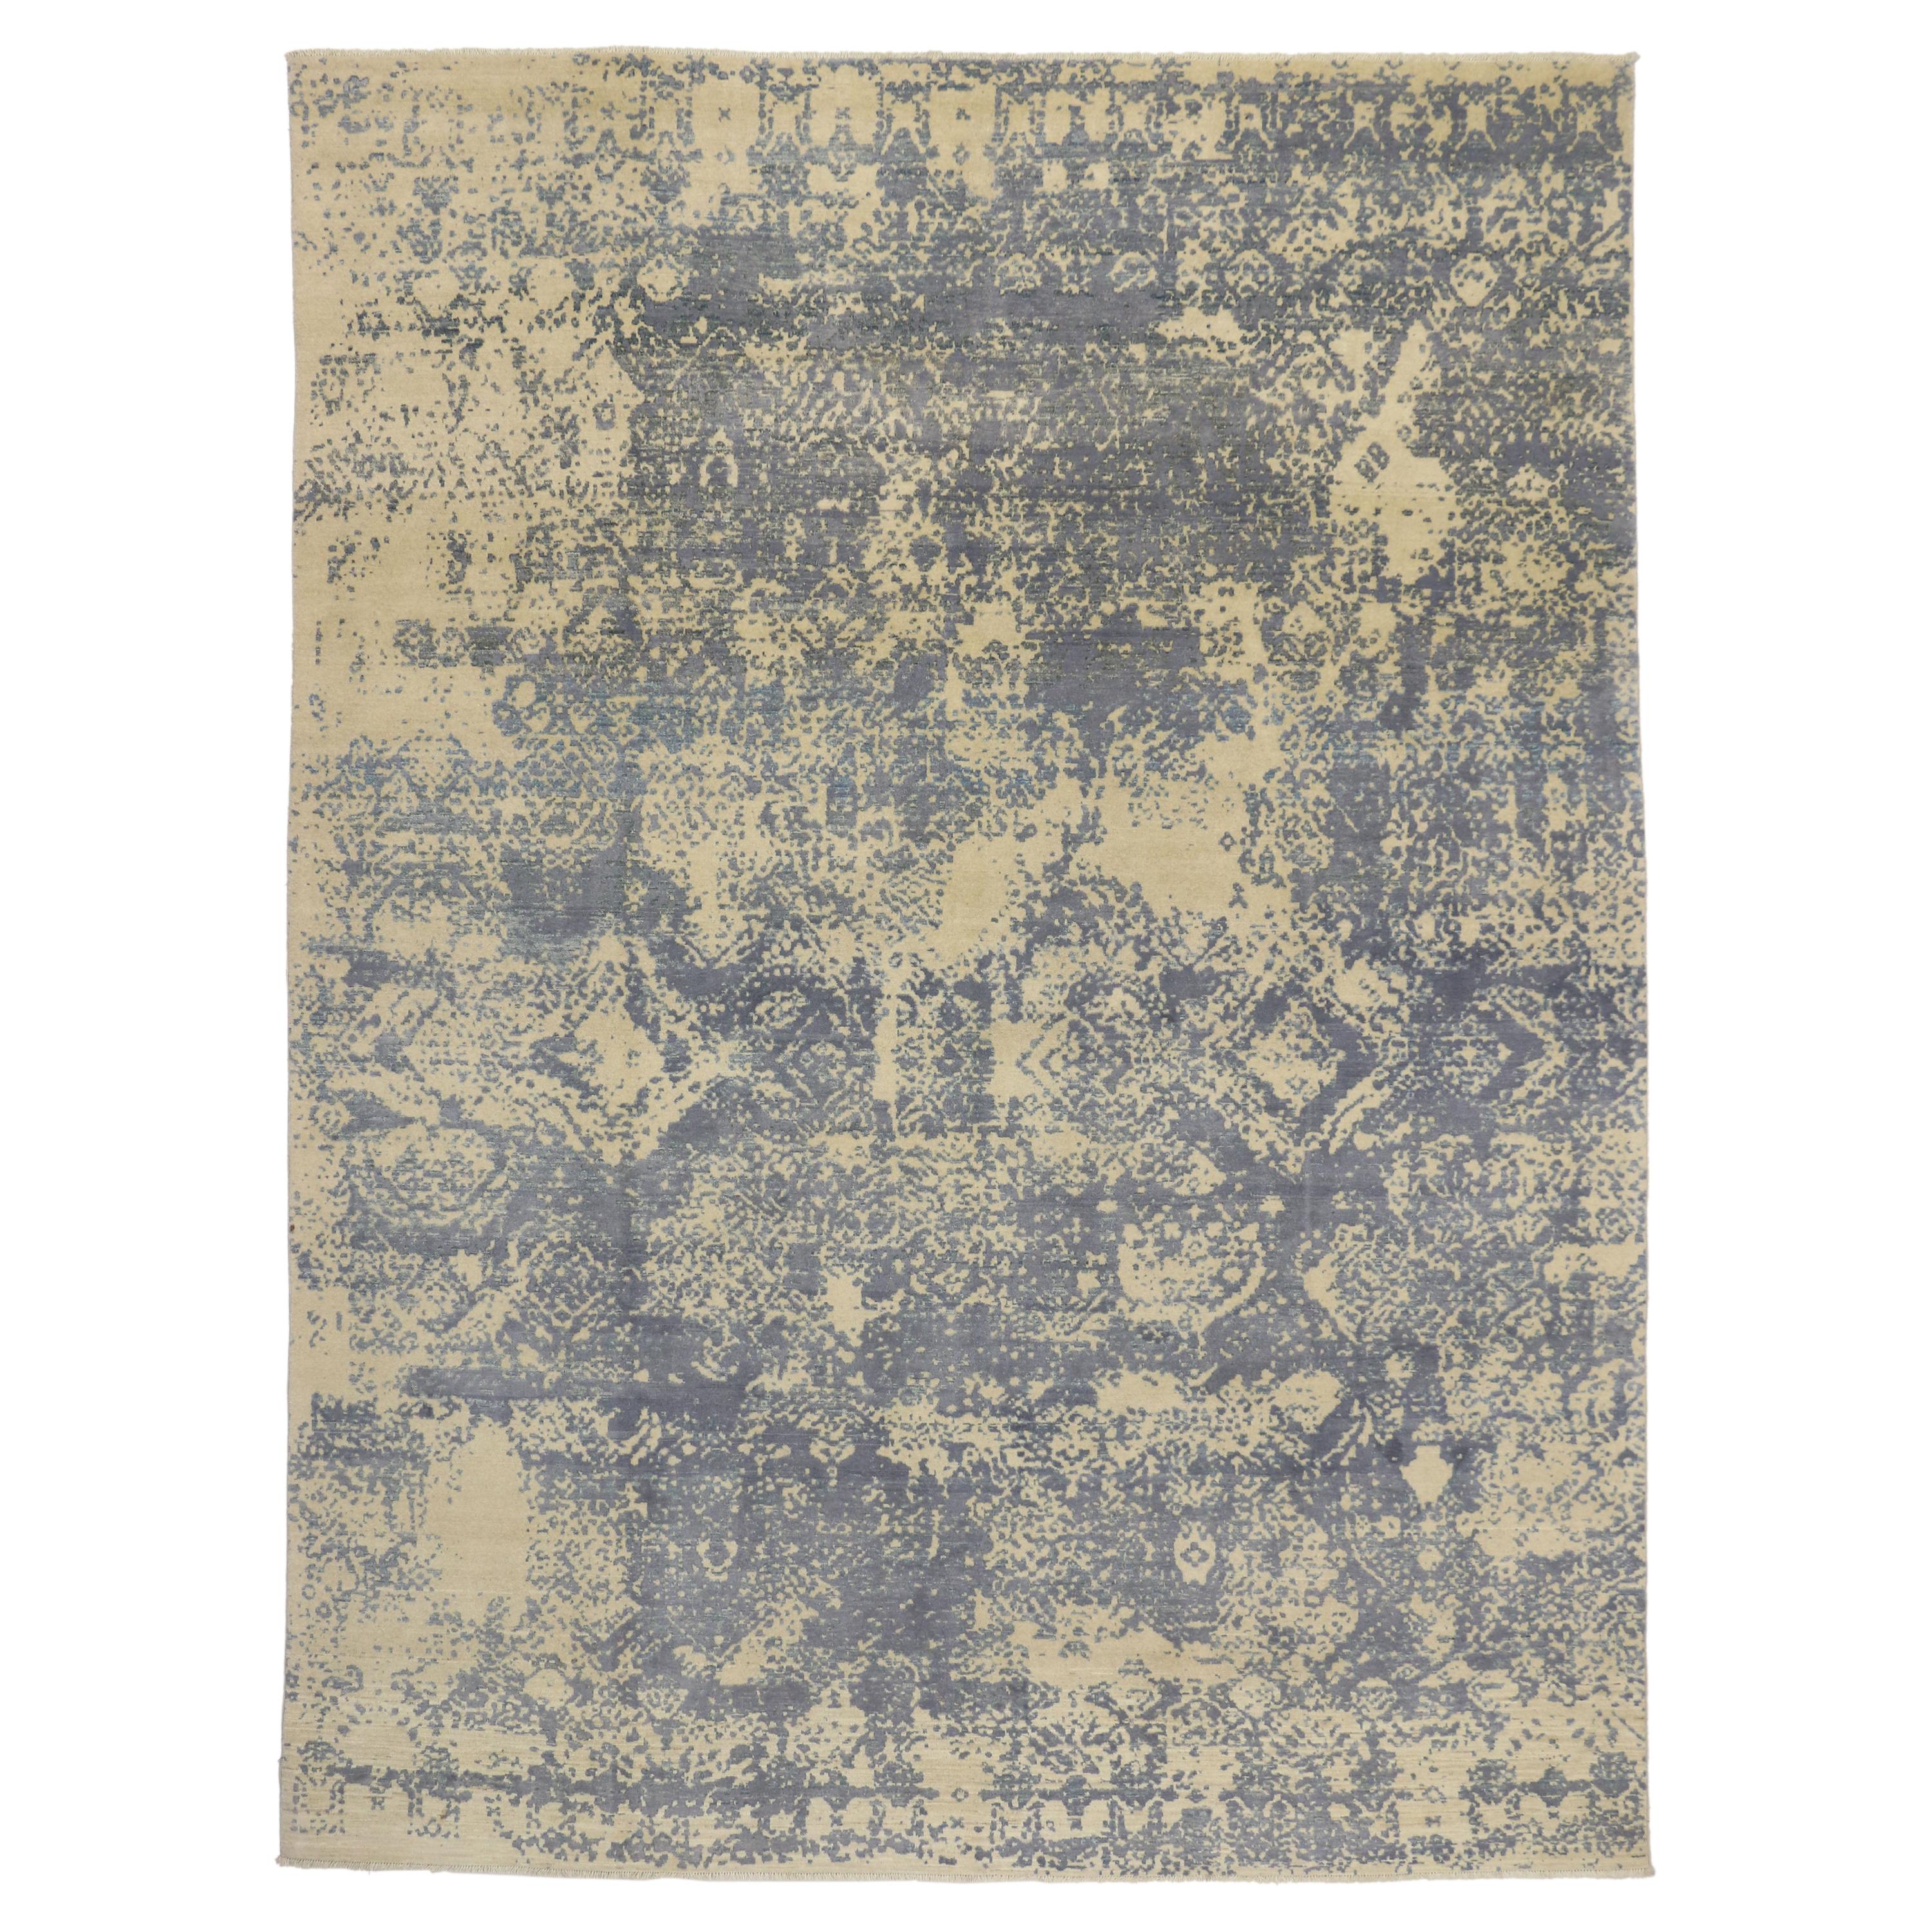 New Contemporary Abstract Area Rug with Erased and Transitional Style